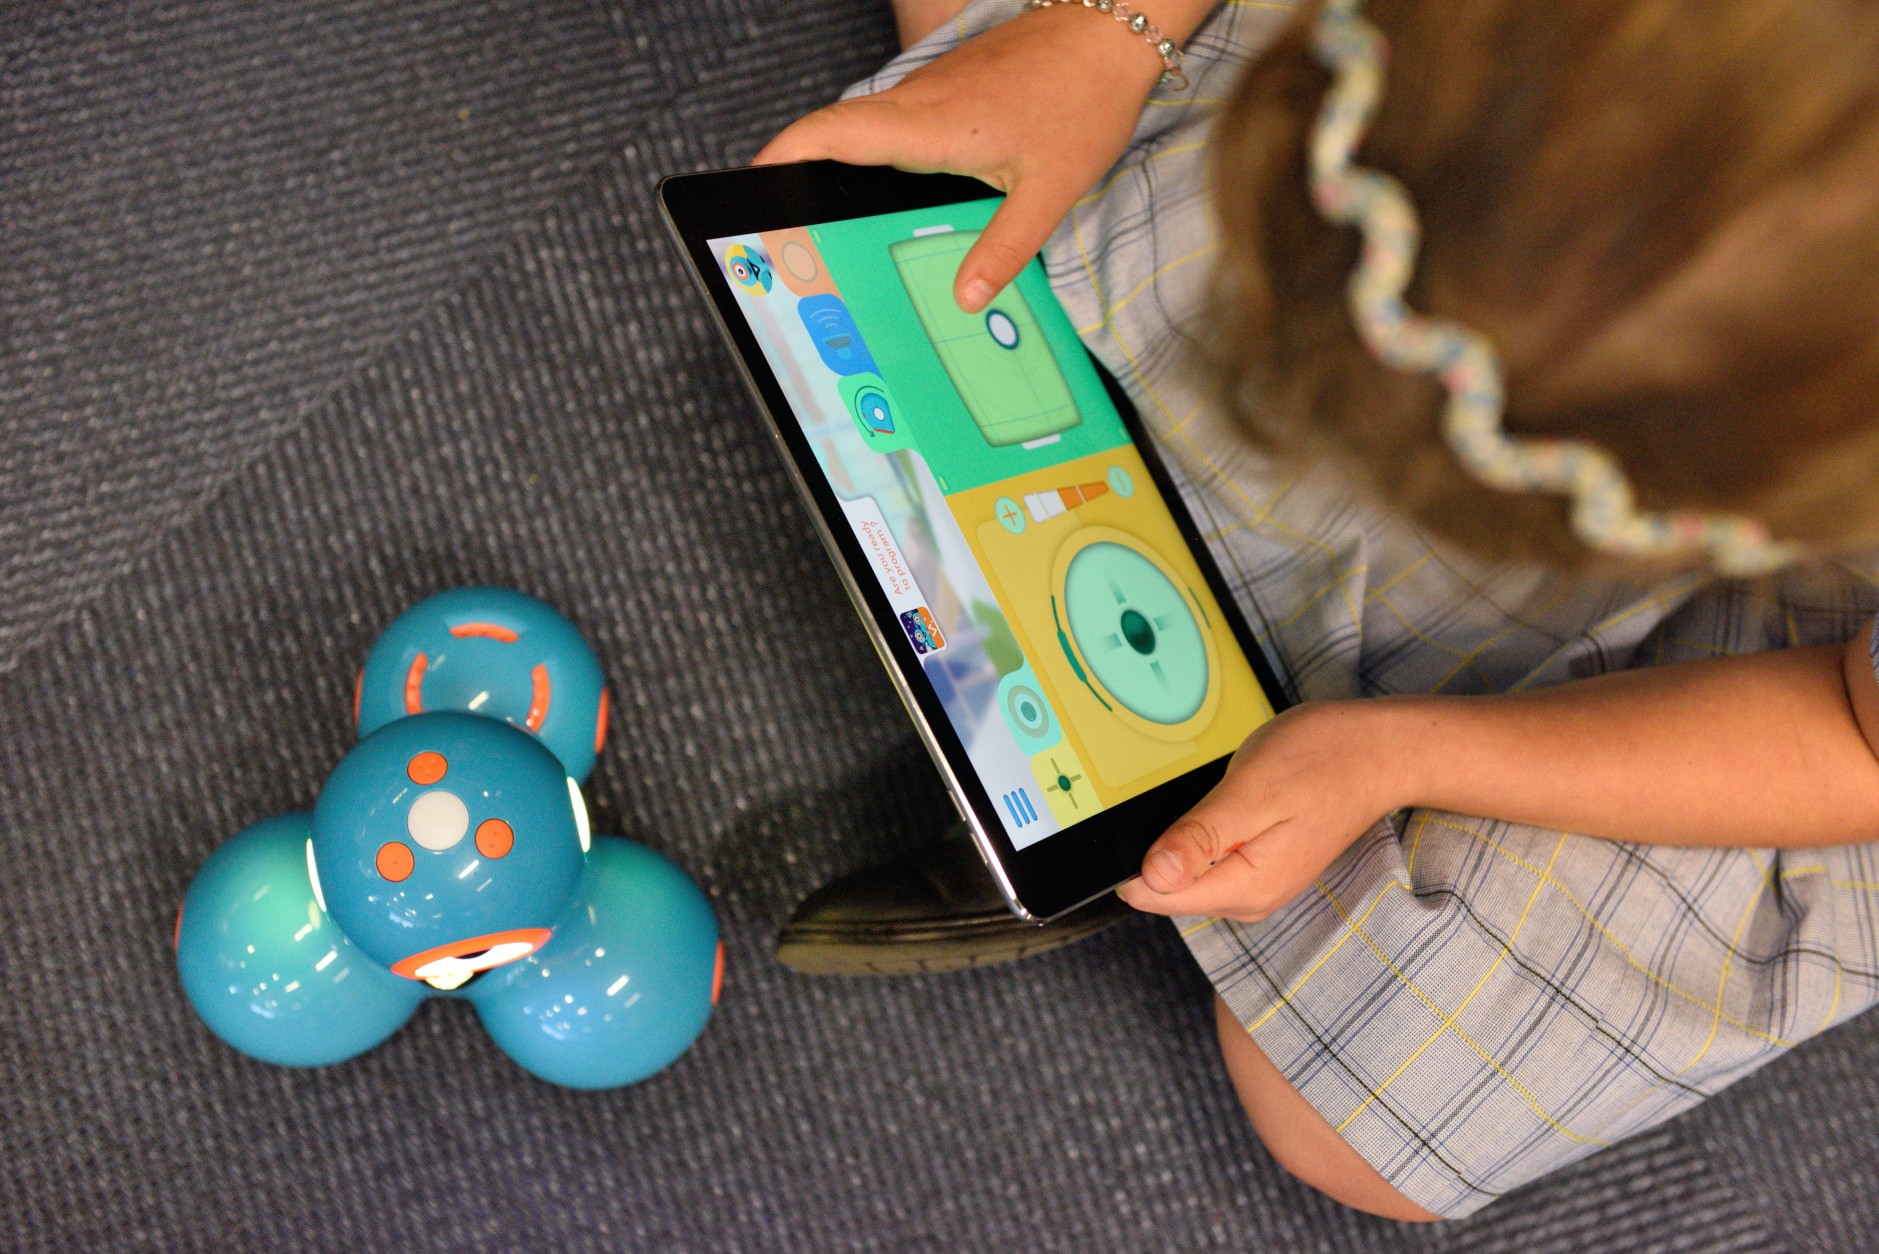 Award-winning Robot, Bring STEM to Life in your Classroom